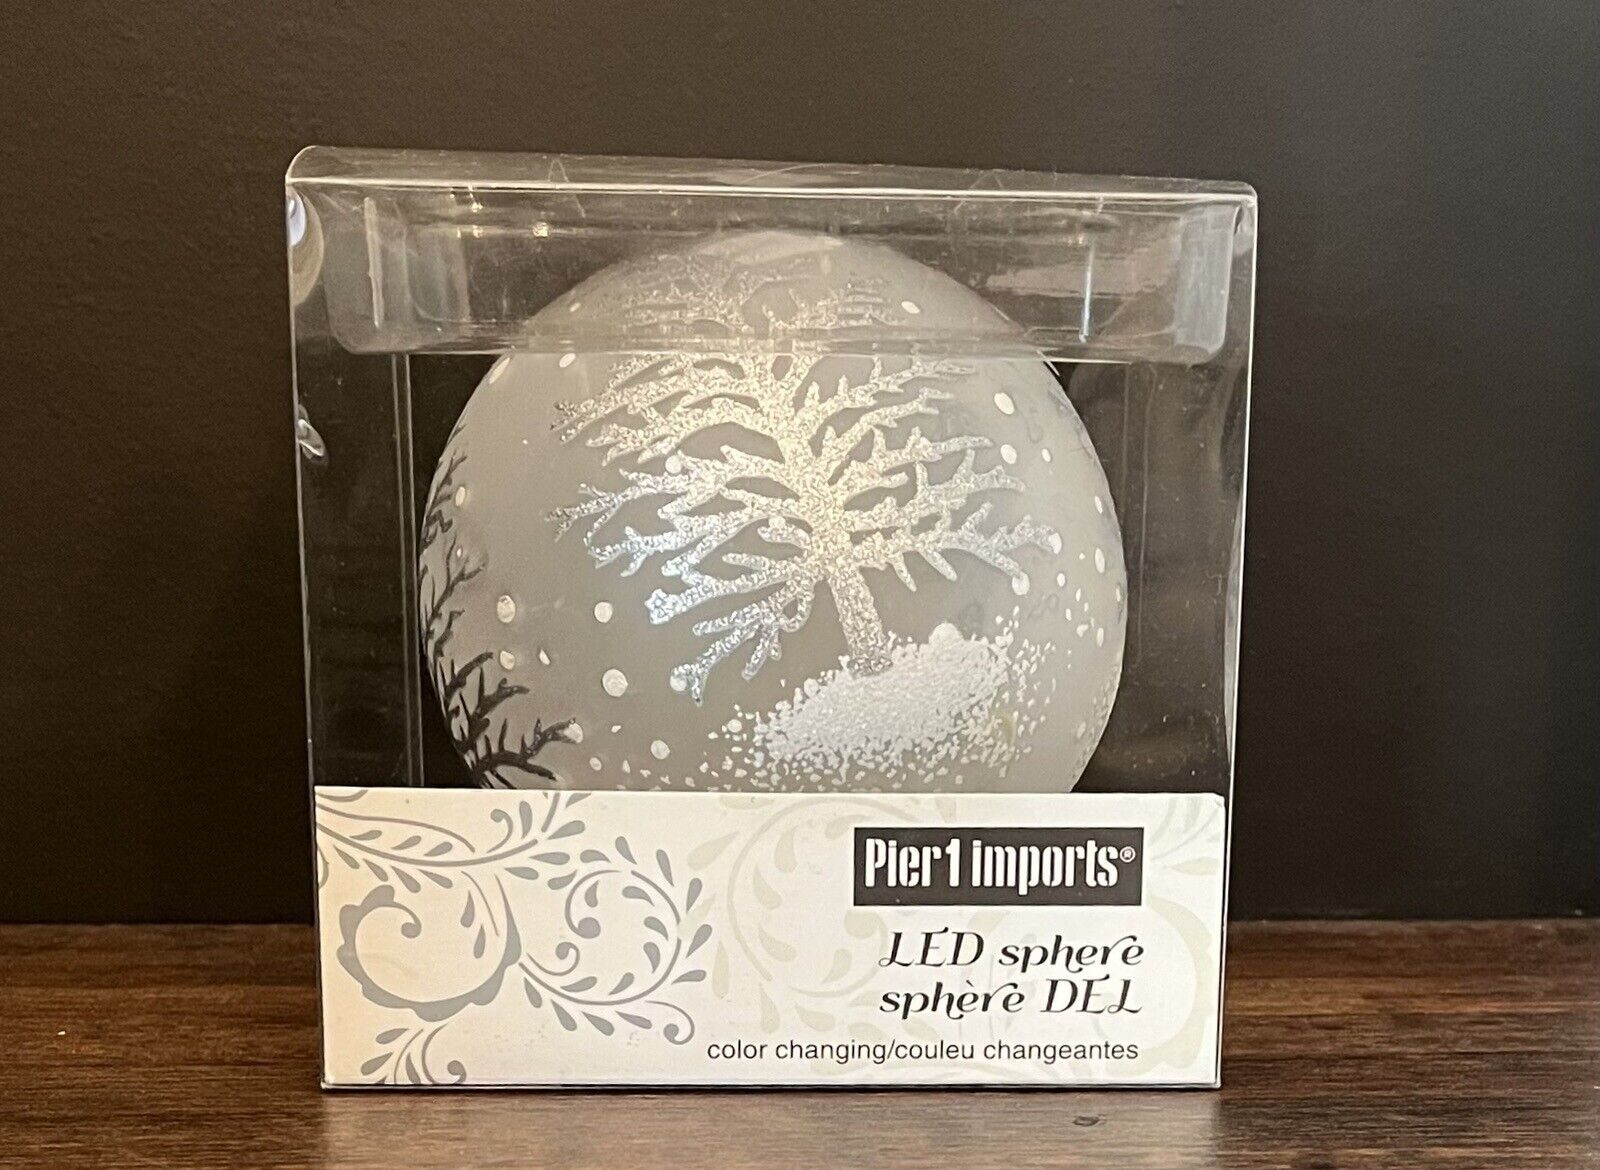 Pier 1 Imports LED Sphere Table Ornament Color Changing Frosted Tree Silhouette